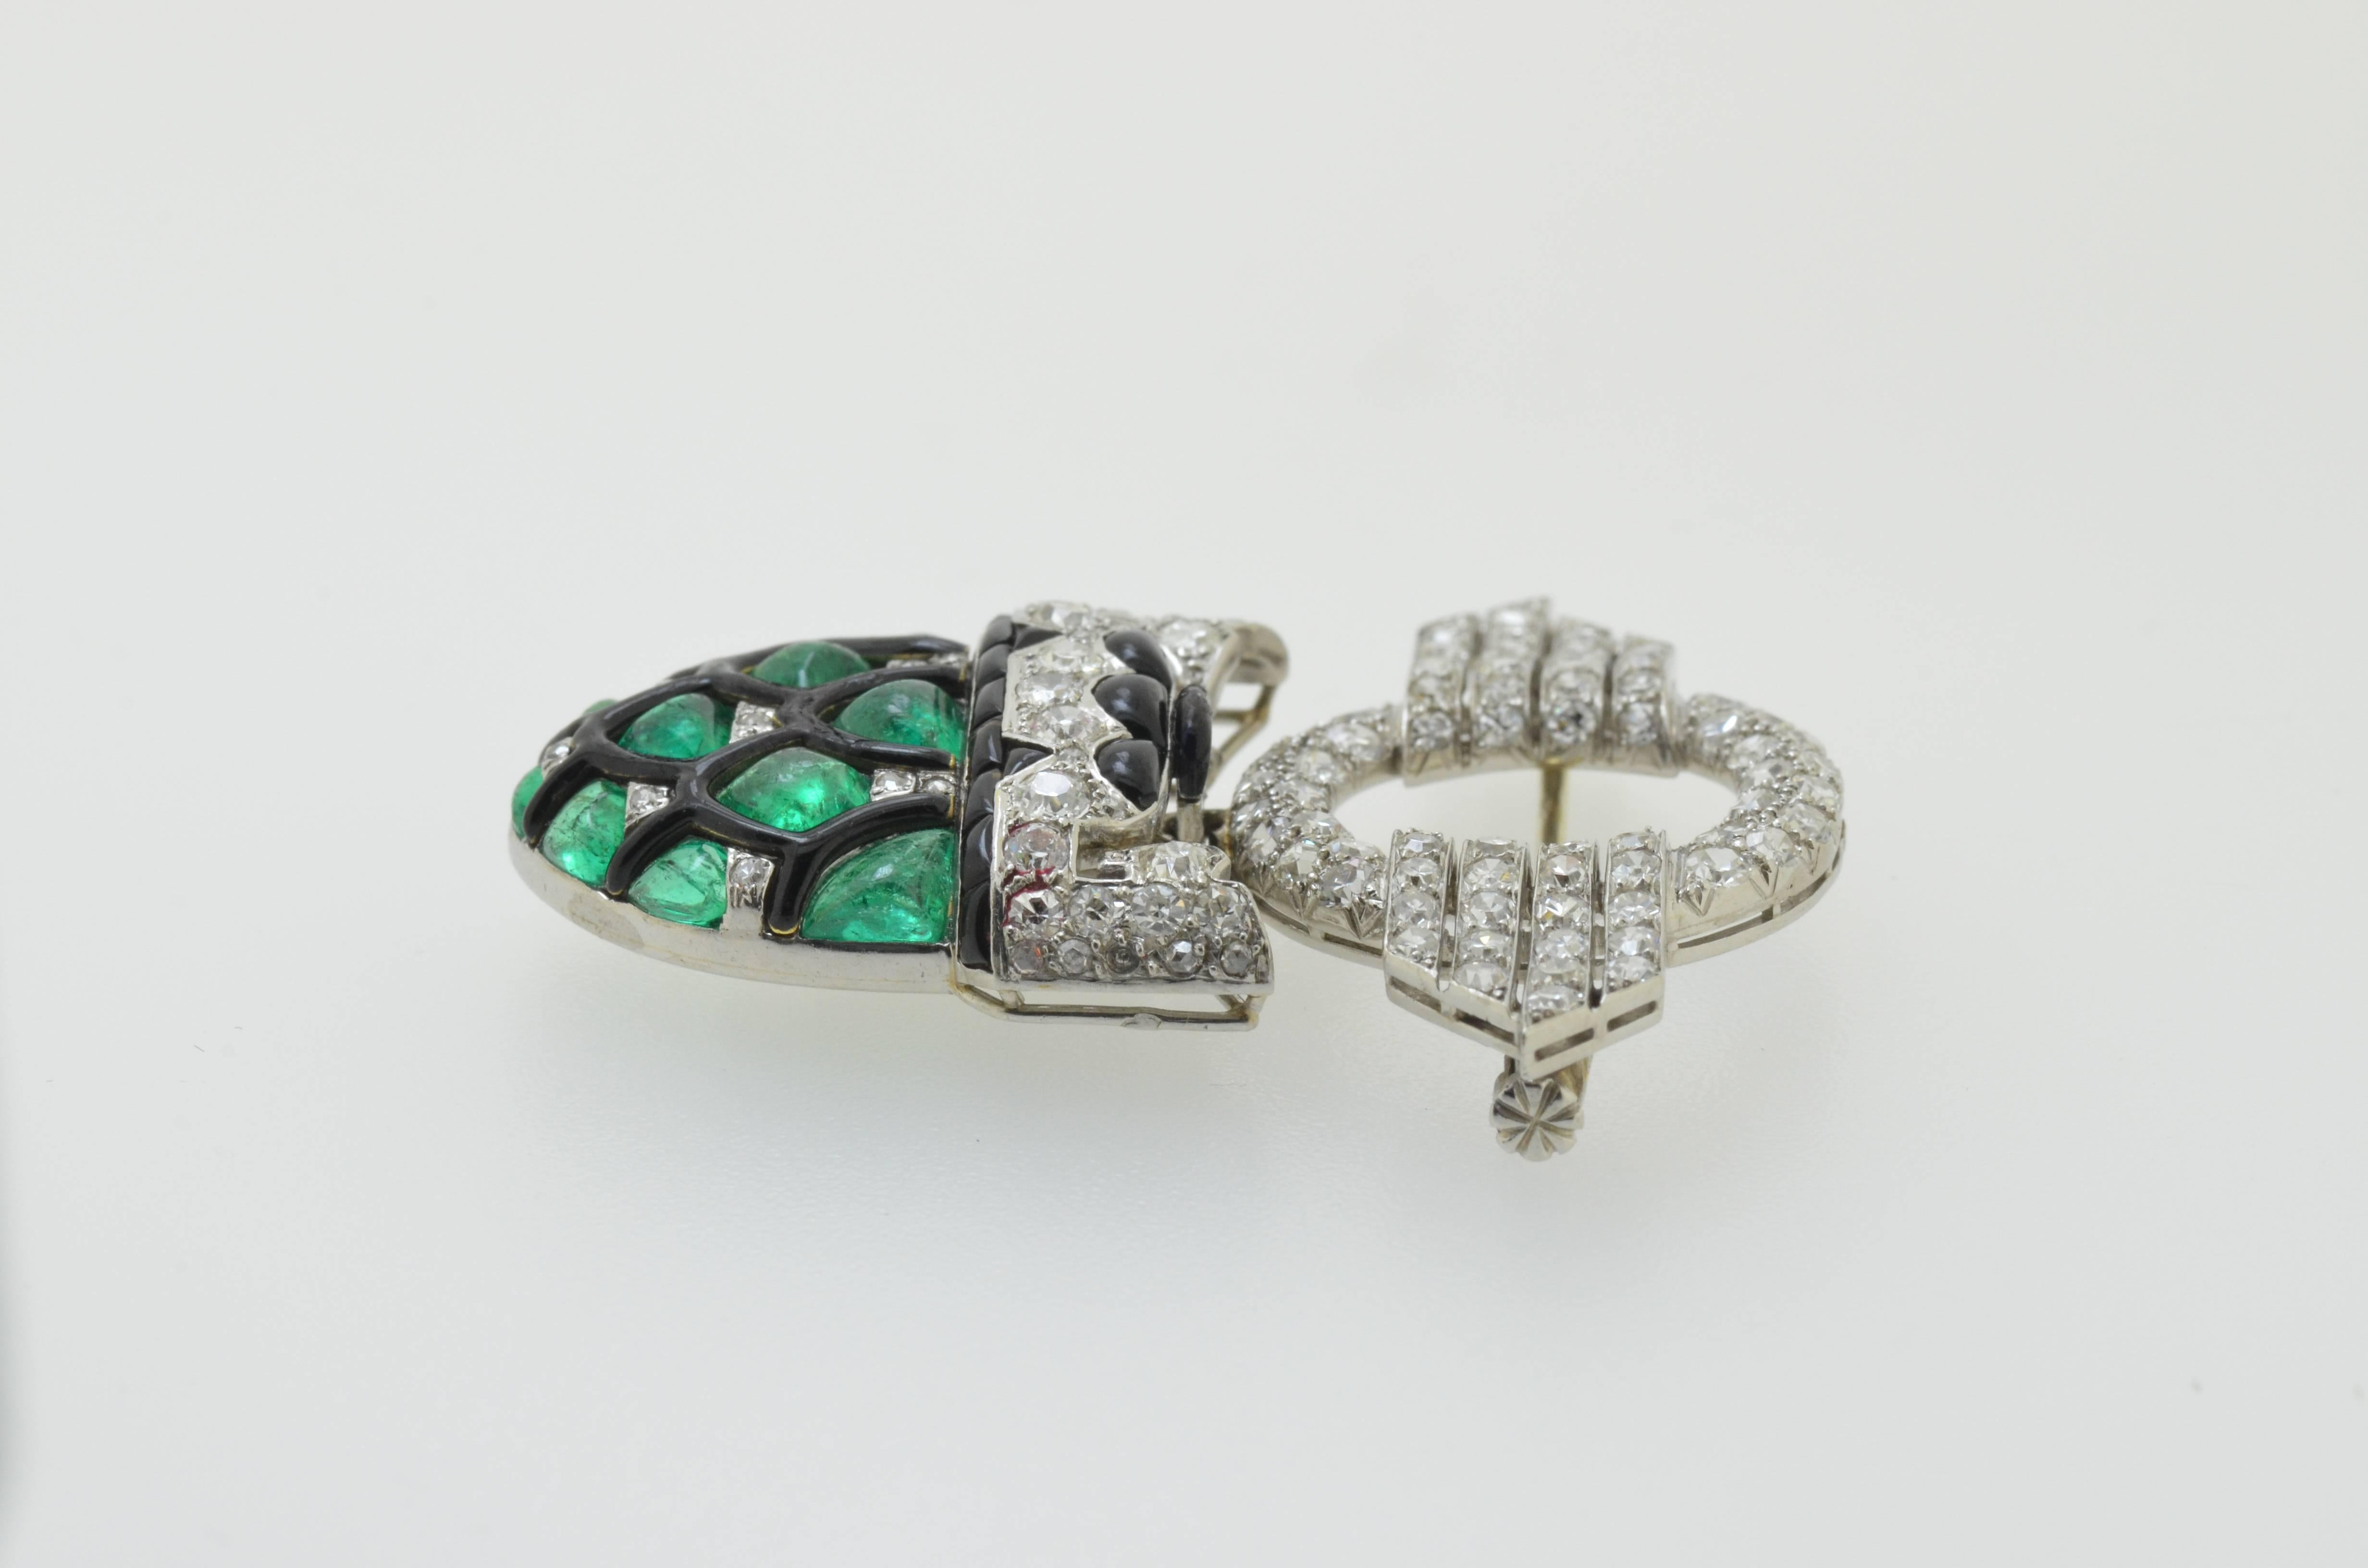 Original art deco diamond and emerald brooch set in with black enemal mounted in 15 karat white gold and platinum 